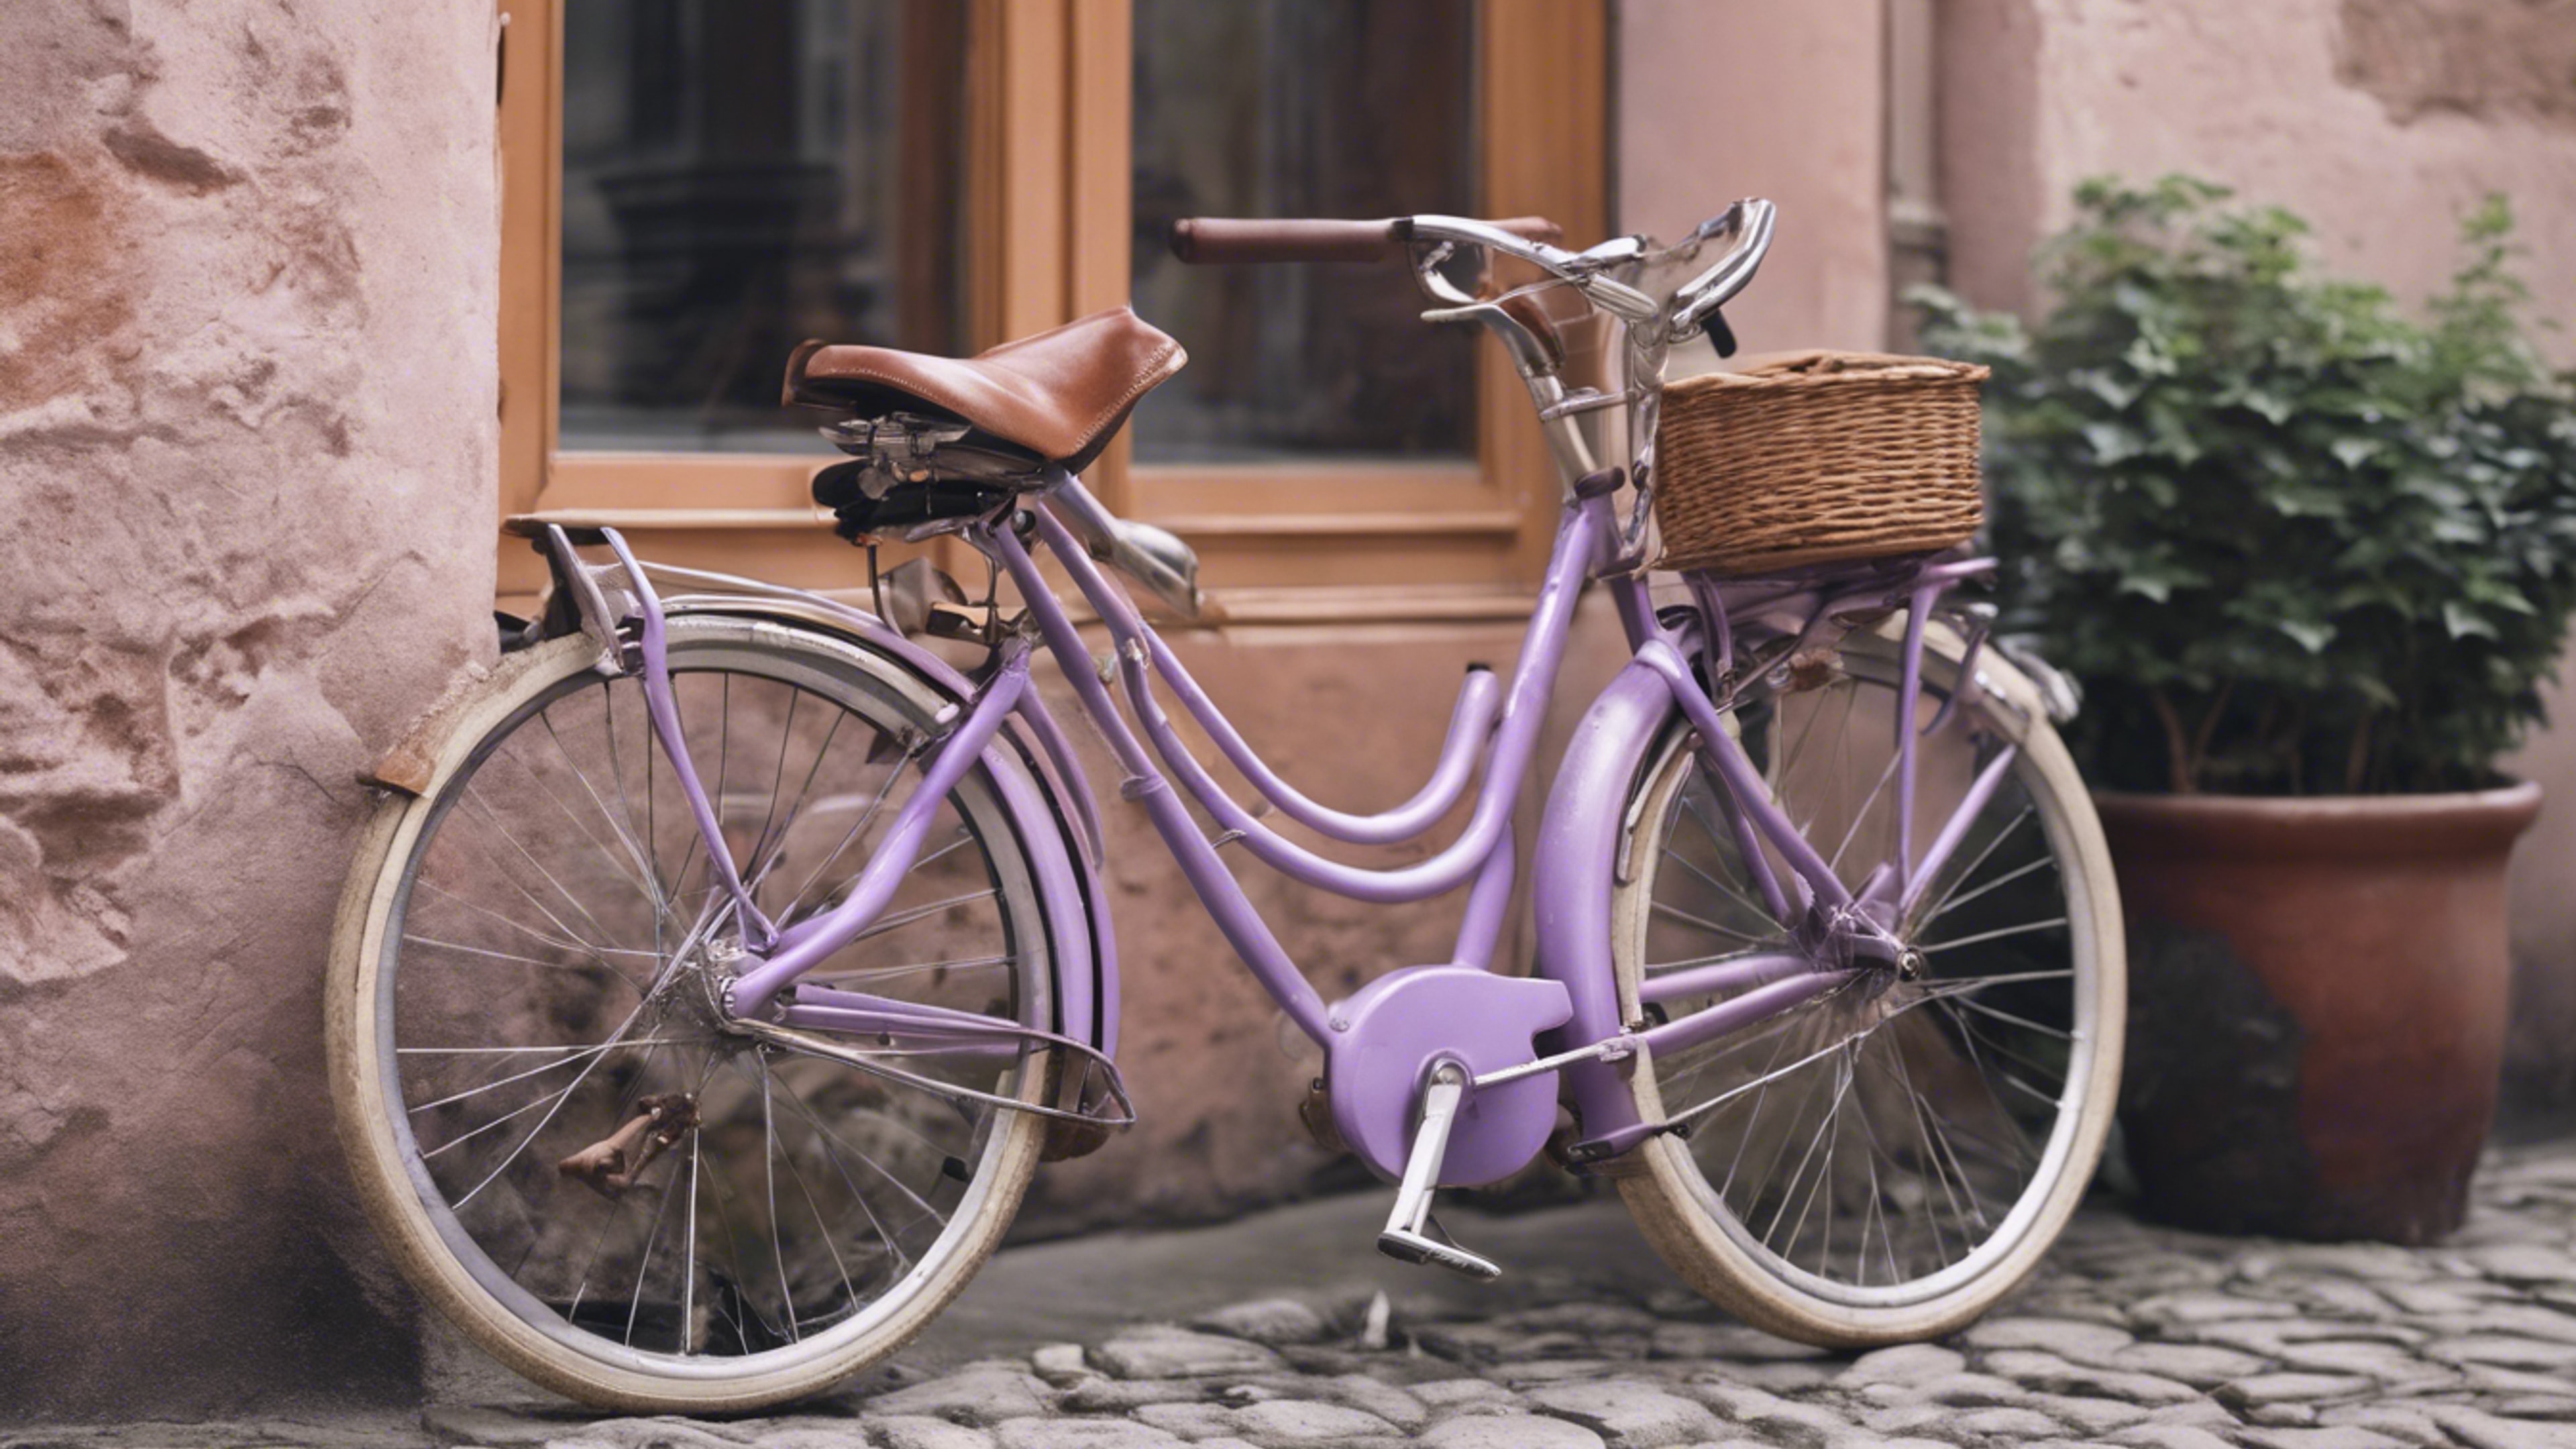 A vintage pastel purple bicycle leaning against a cobblestone wall.壁紙[62be16075cb04ce6b9da]